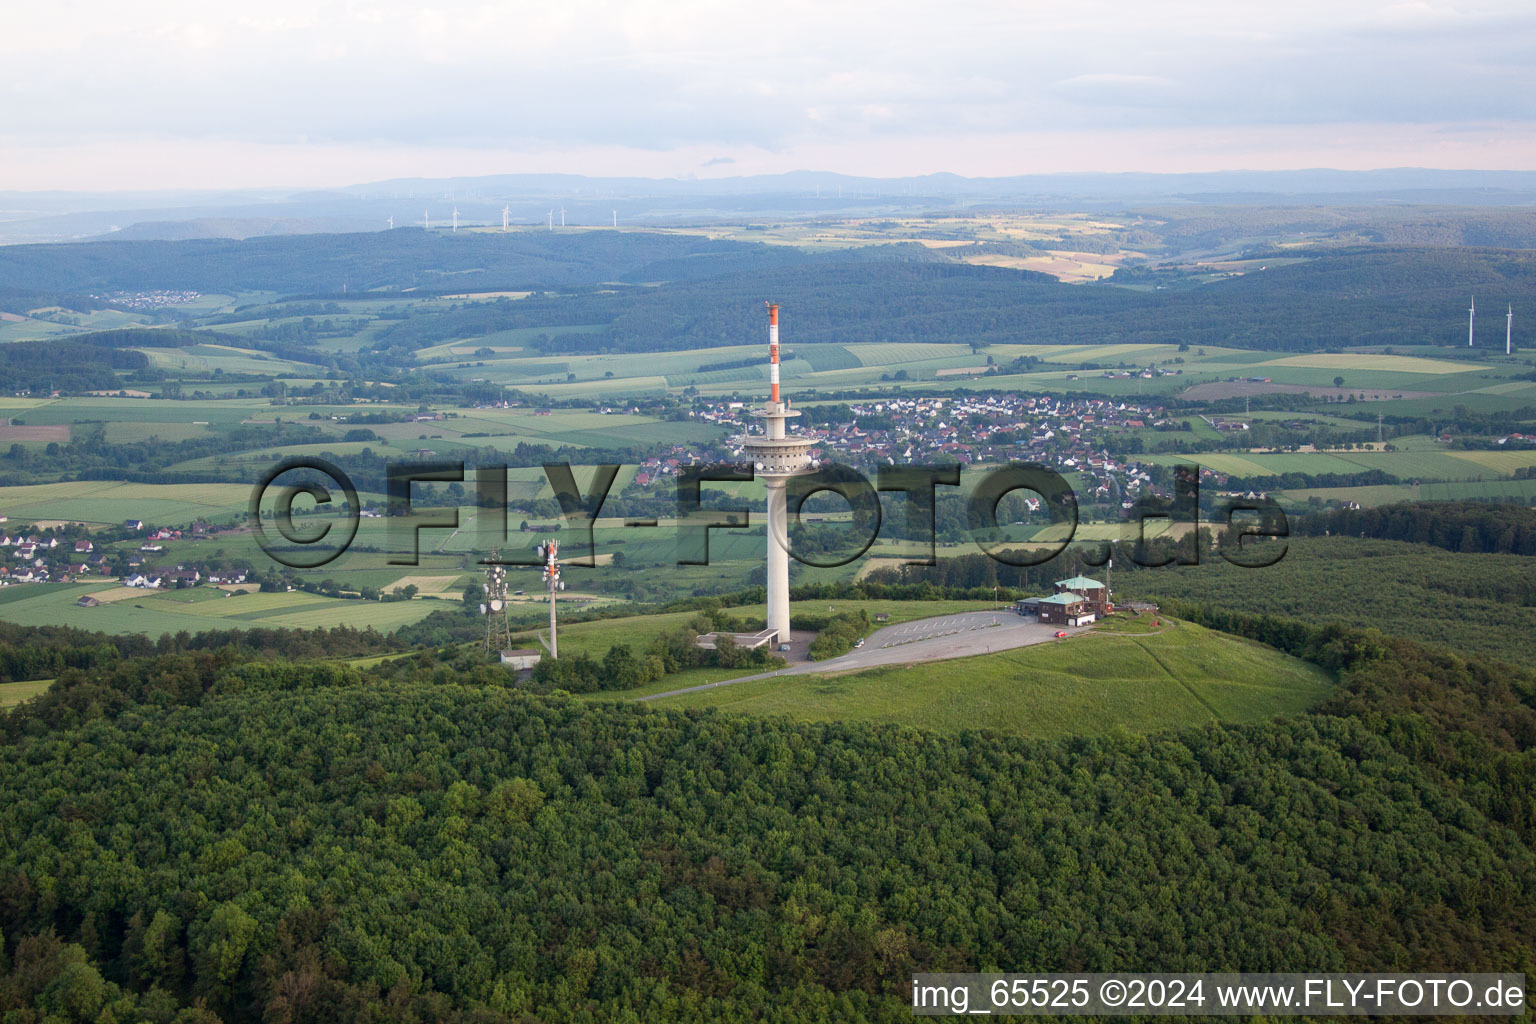 Köterberg in the state North Rhine-Westphalia, Germany seen from above